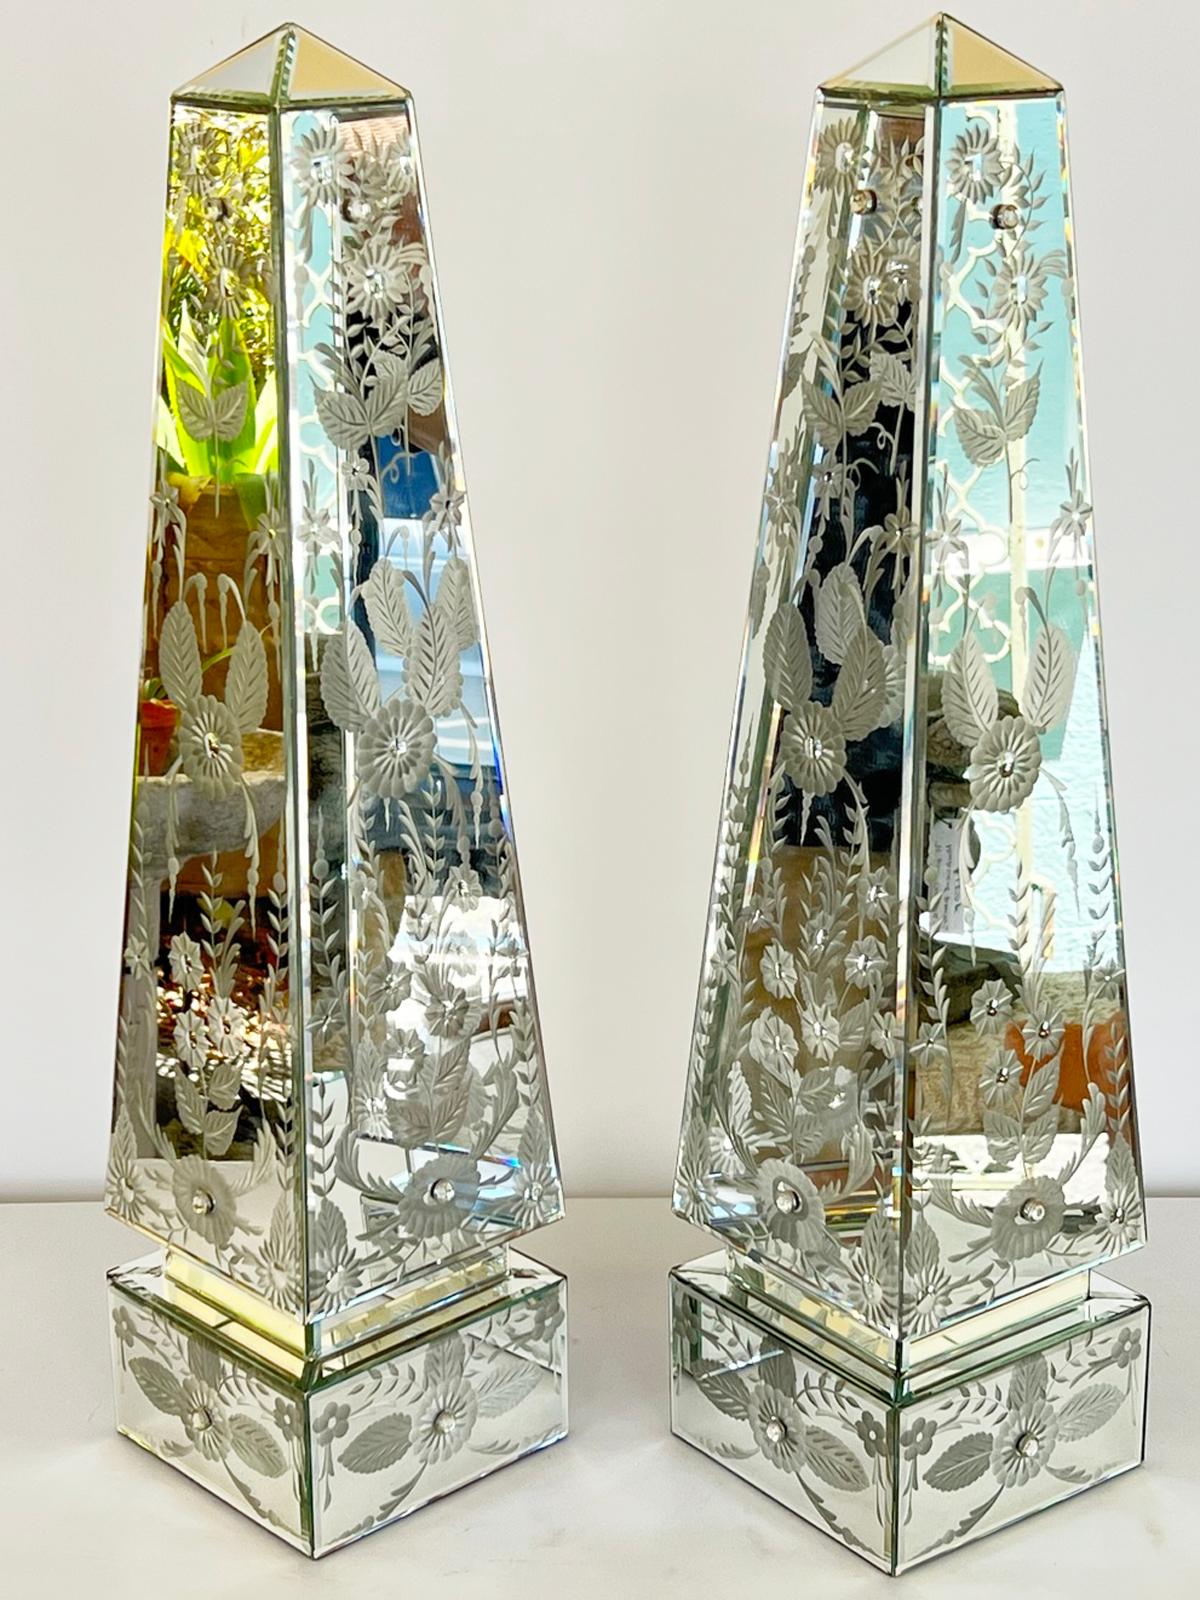 Pair of obelisks, clad in mirrorplate in the Venetian style. Each side is etched with scrolling florals. 

Stock ID: D1699.